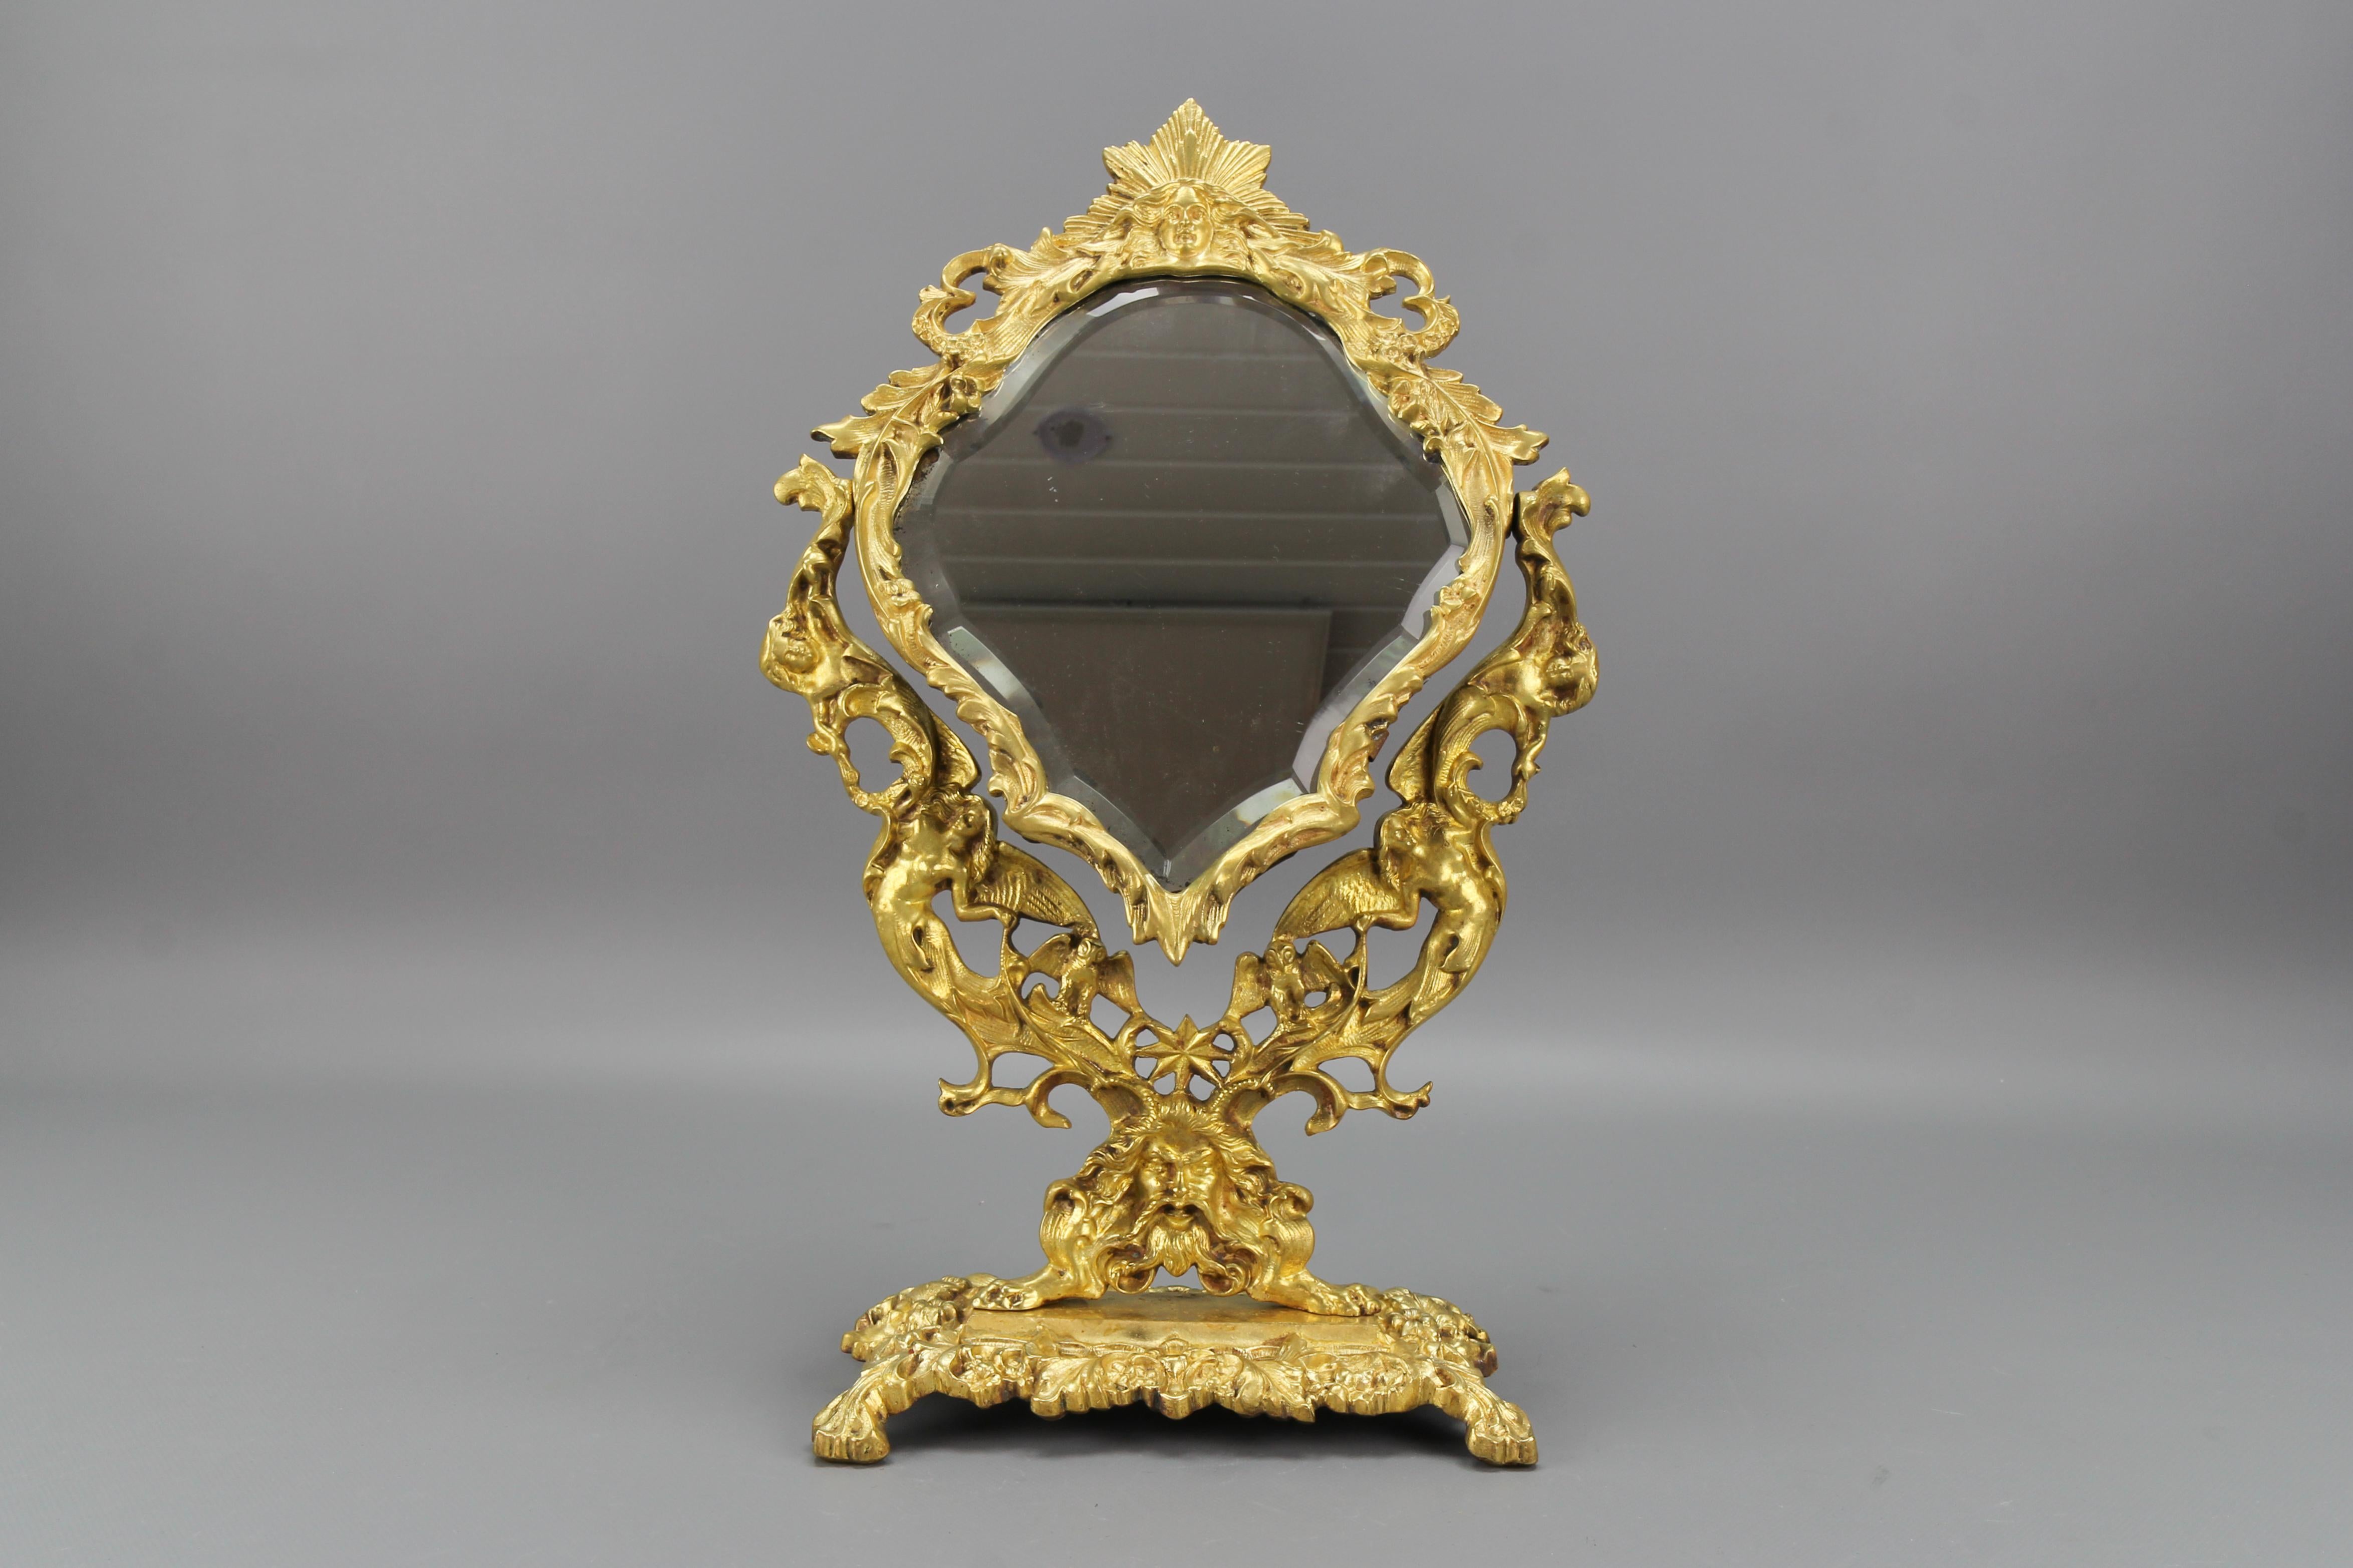 French Louis XIV Style bronze and brass faceted desktop mirror from the 1920s
Adorned with typical Louis XIV-style symbols, allegorical figures, floral, and foliate motifs around the beautifully shaped and faceted mirror, this splendid ornate